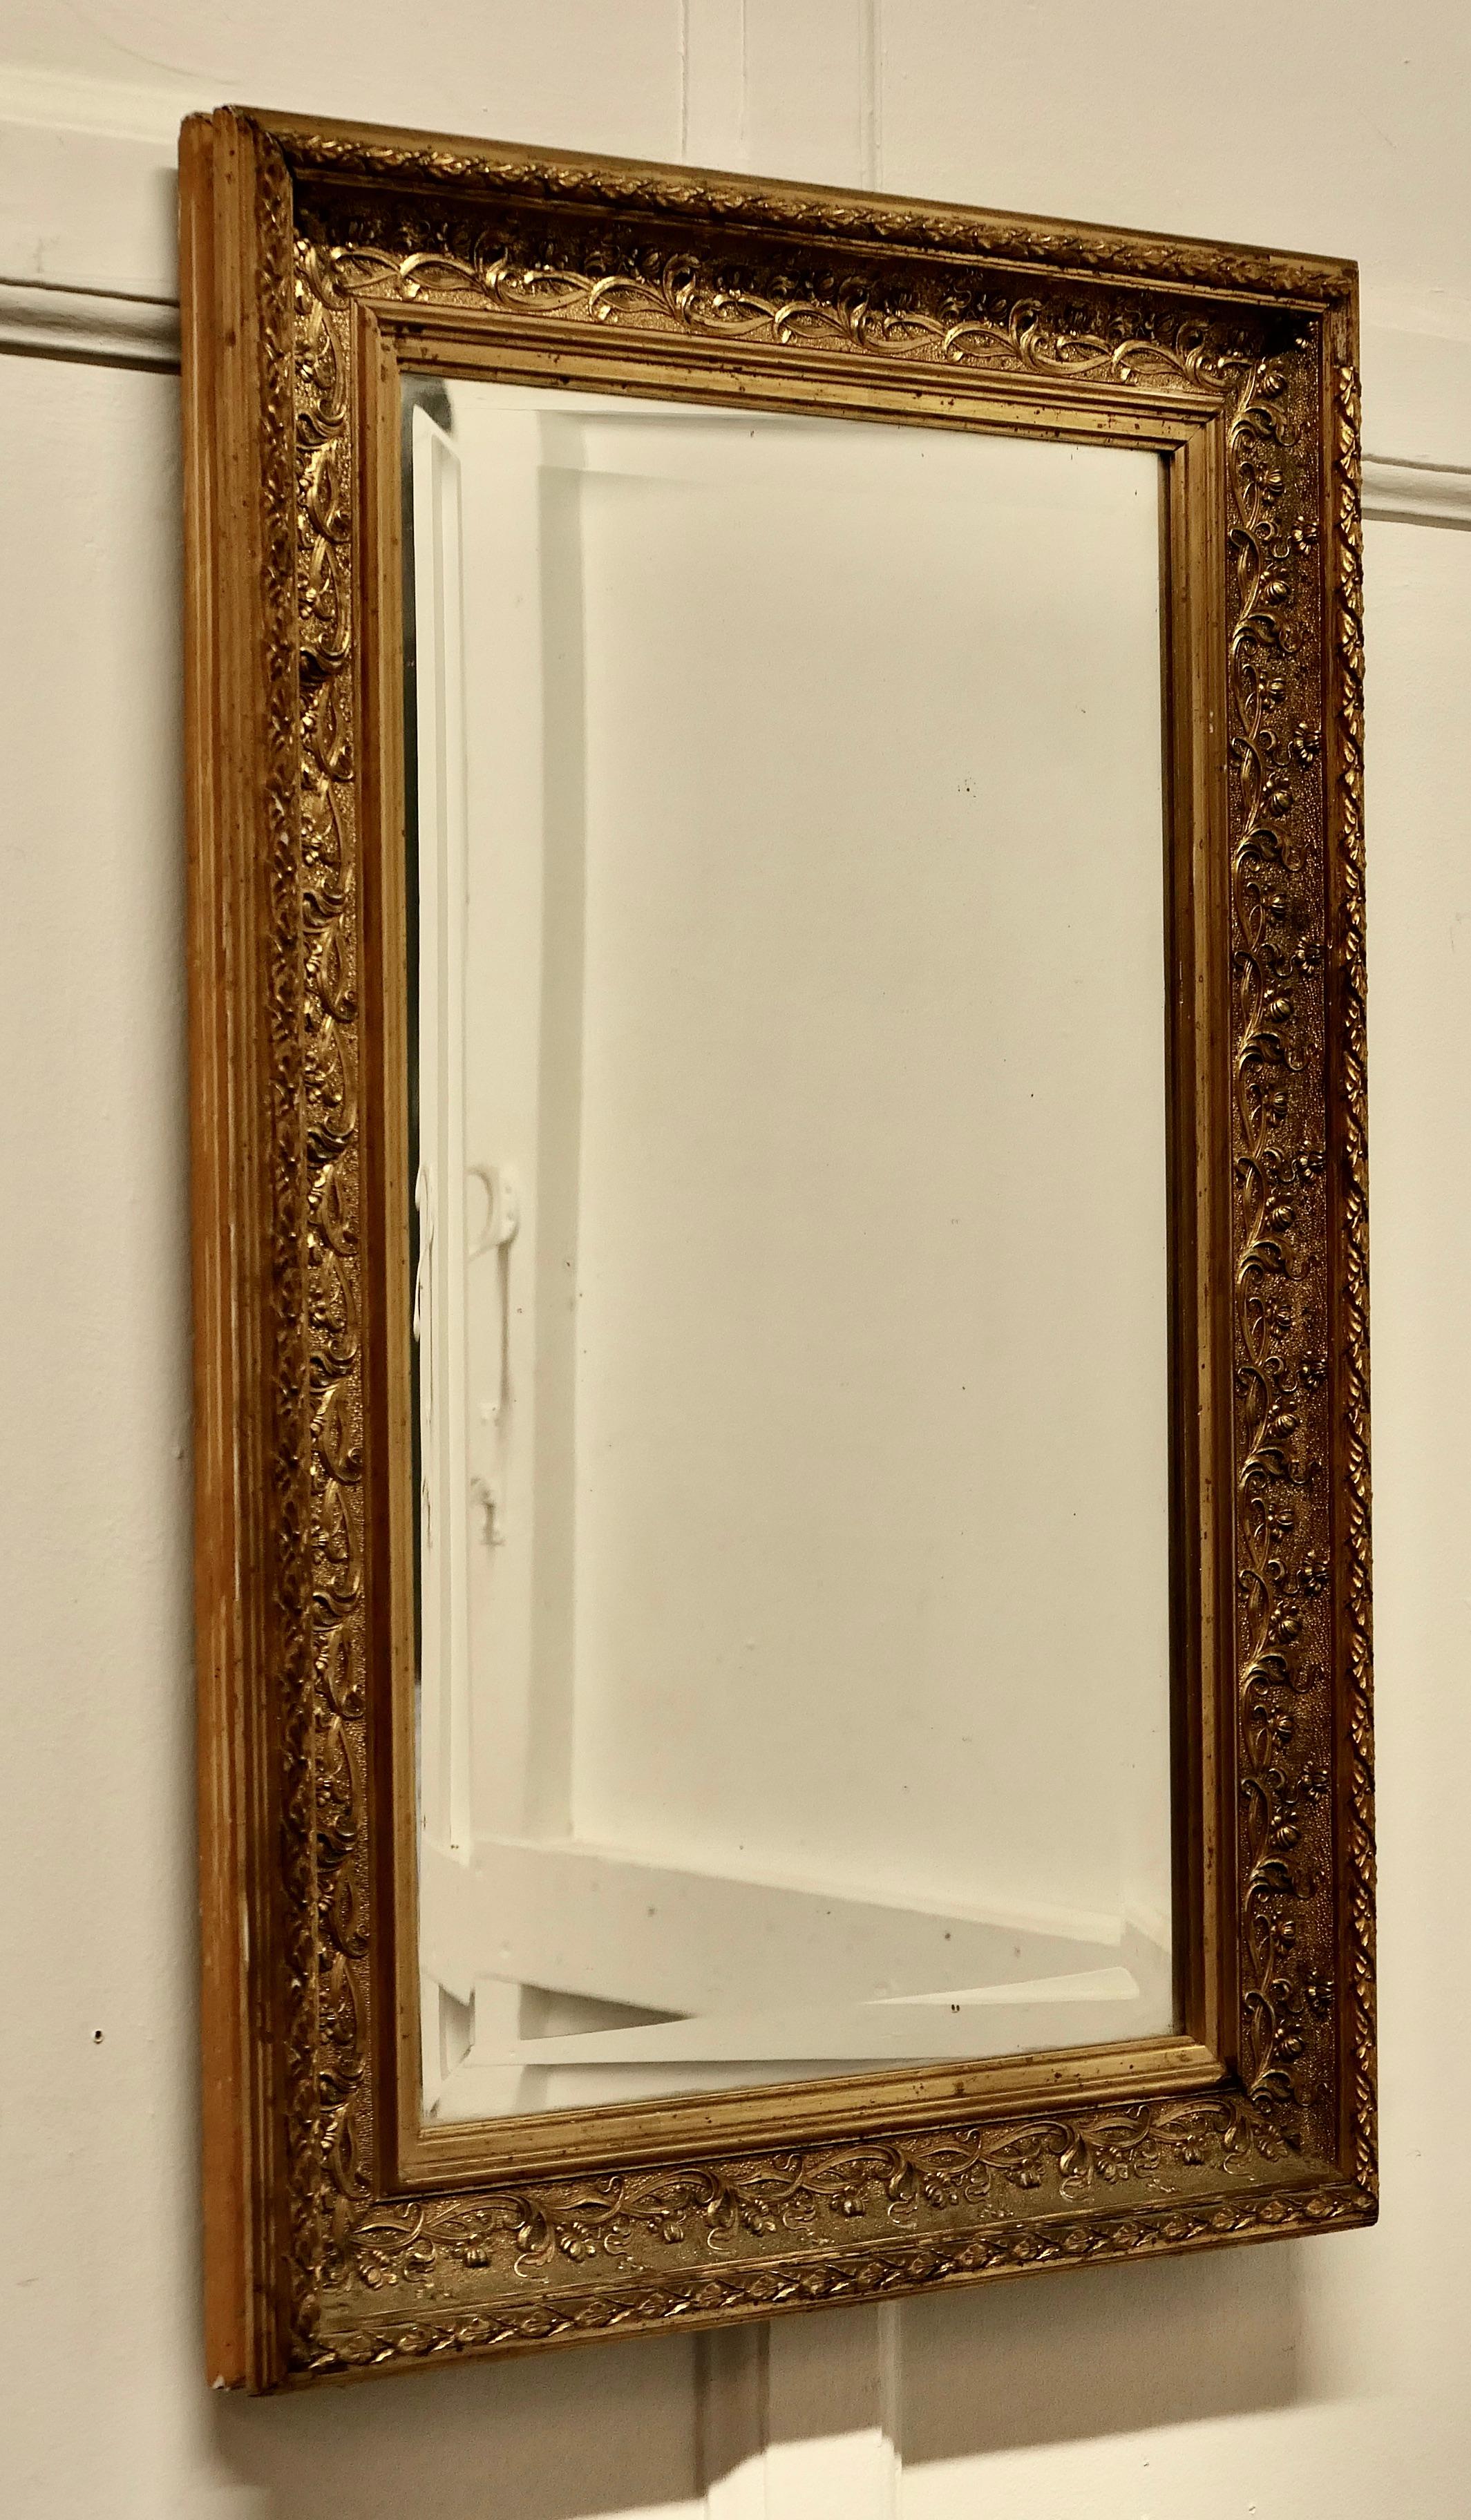 Beautiful 19th century gilt wall mirror

This is a lovely old mirror it is set in a Decorative Gilt 3” wide Frame, 
The looking Glass is original and bevelled and in good condition as is the frame
The overall size is 28” high, 19” wide an it is